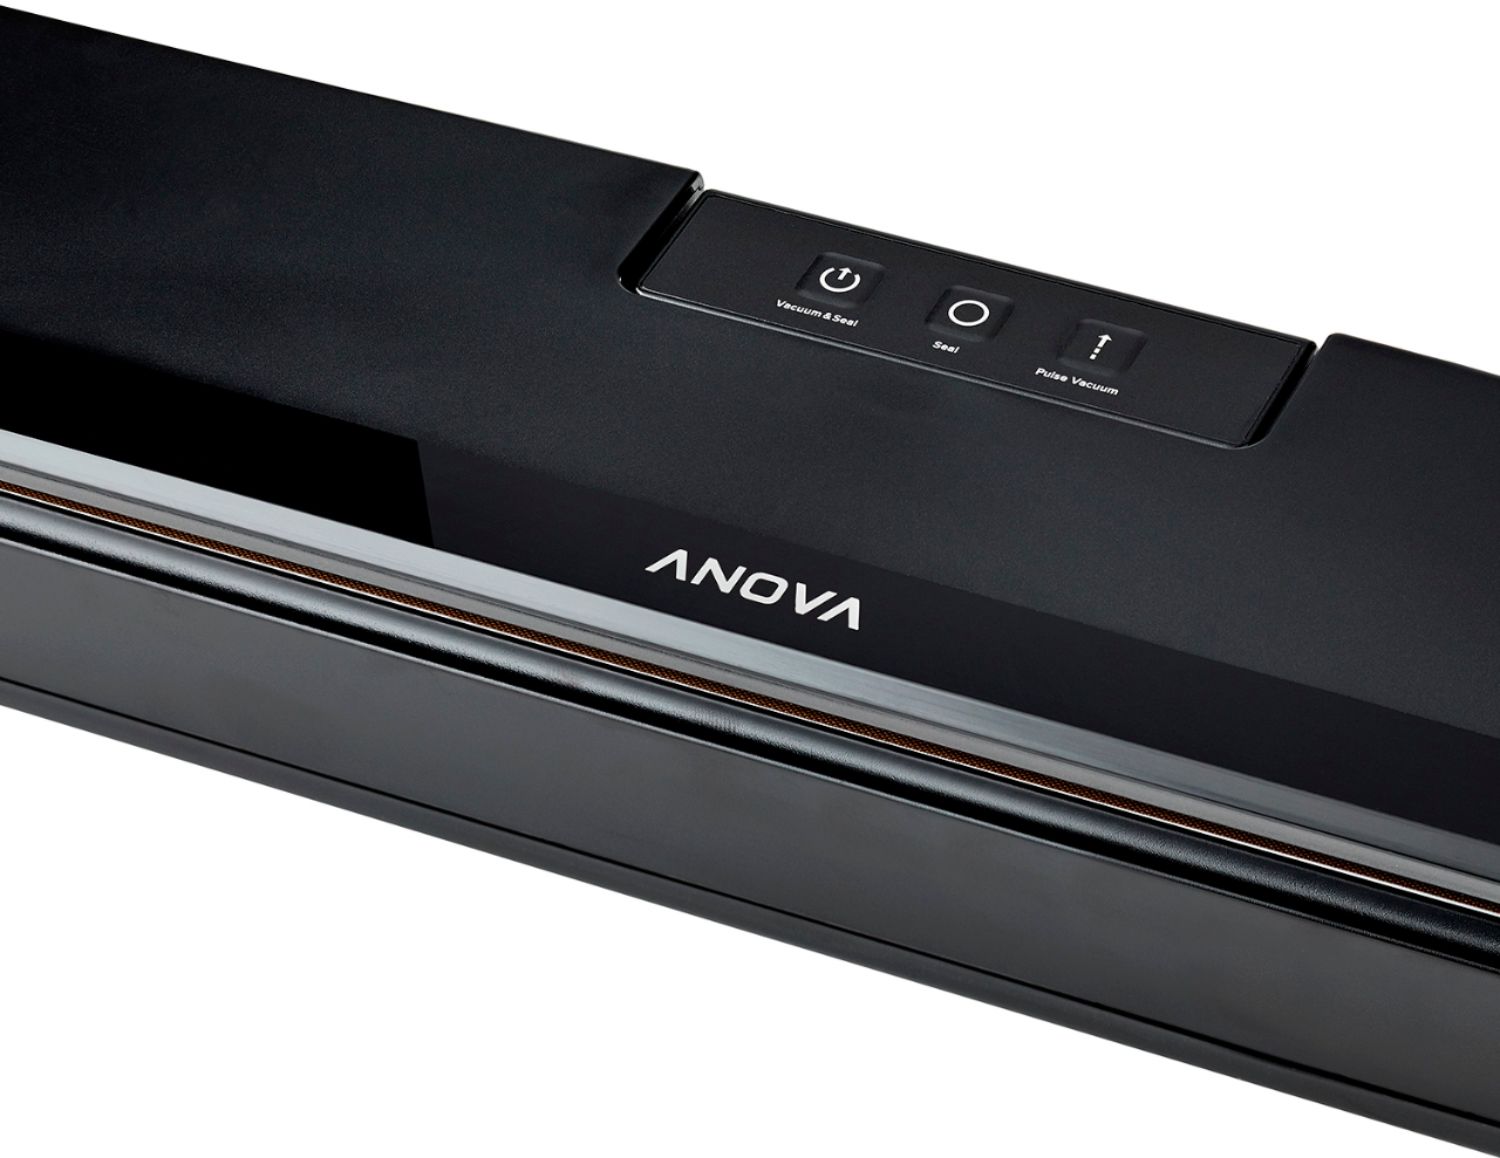 Anova on X: Meet the Anova Precision™ Chamber Vacuum Sealer. A specialist  in airtight, mess-free sealing, even when you've got liquids in the bag.  Plus, make fast infusions, quick pickles, and more. #